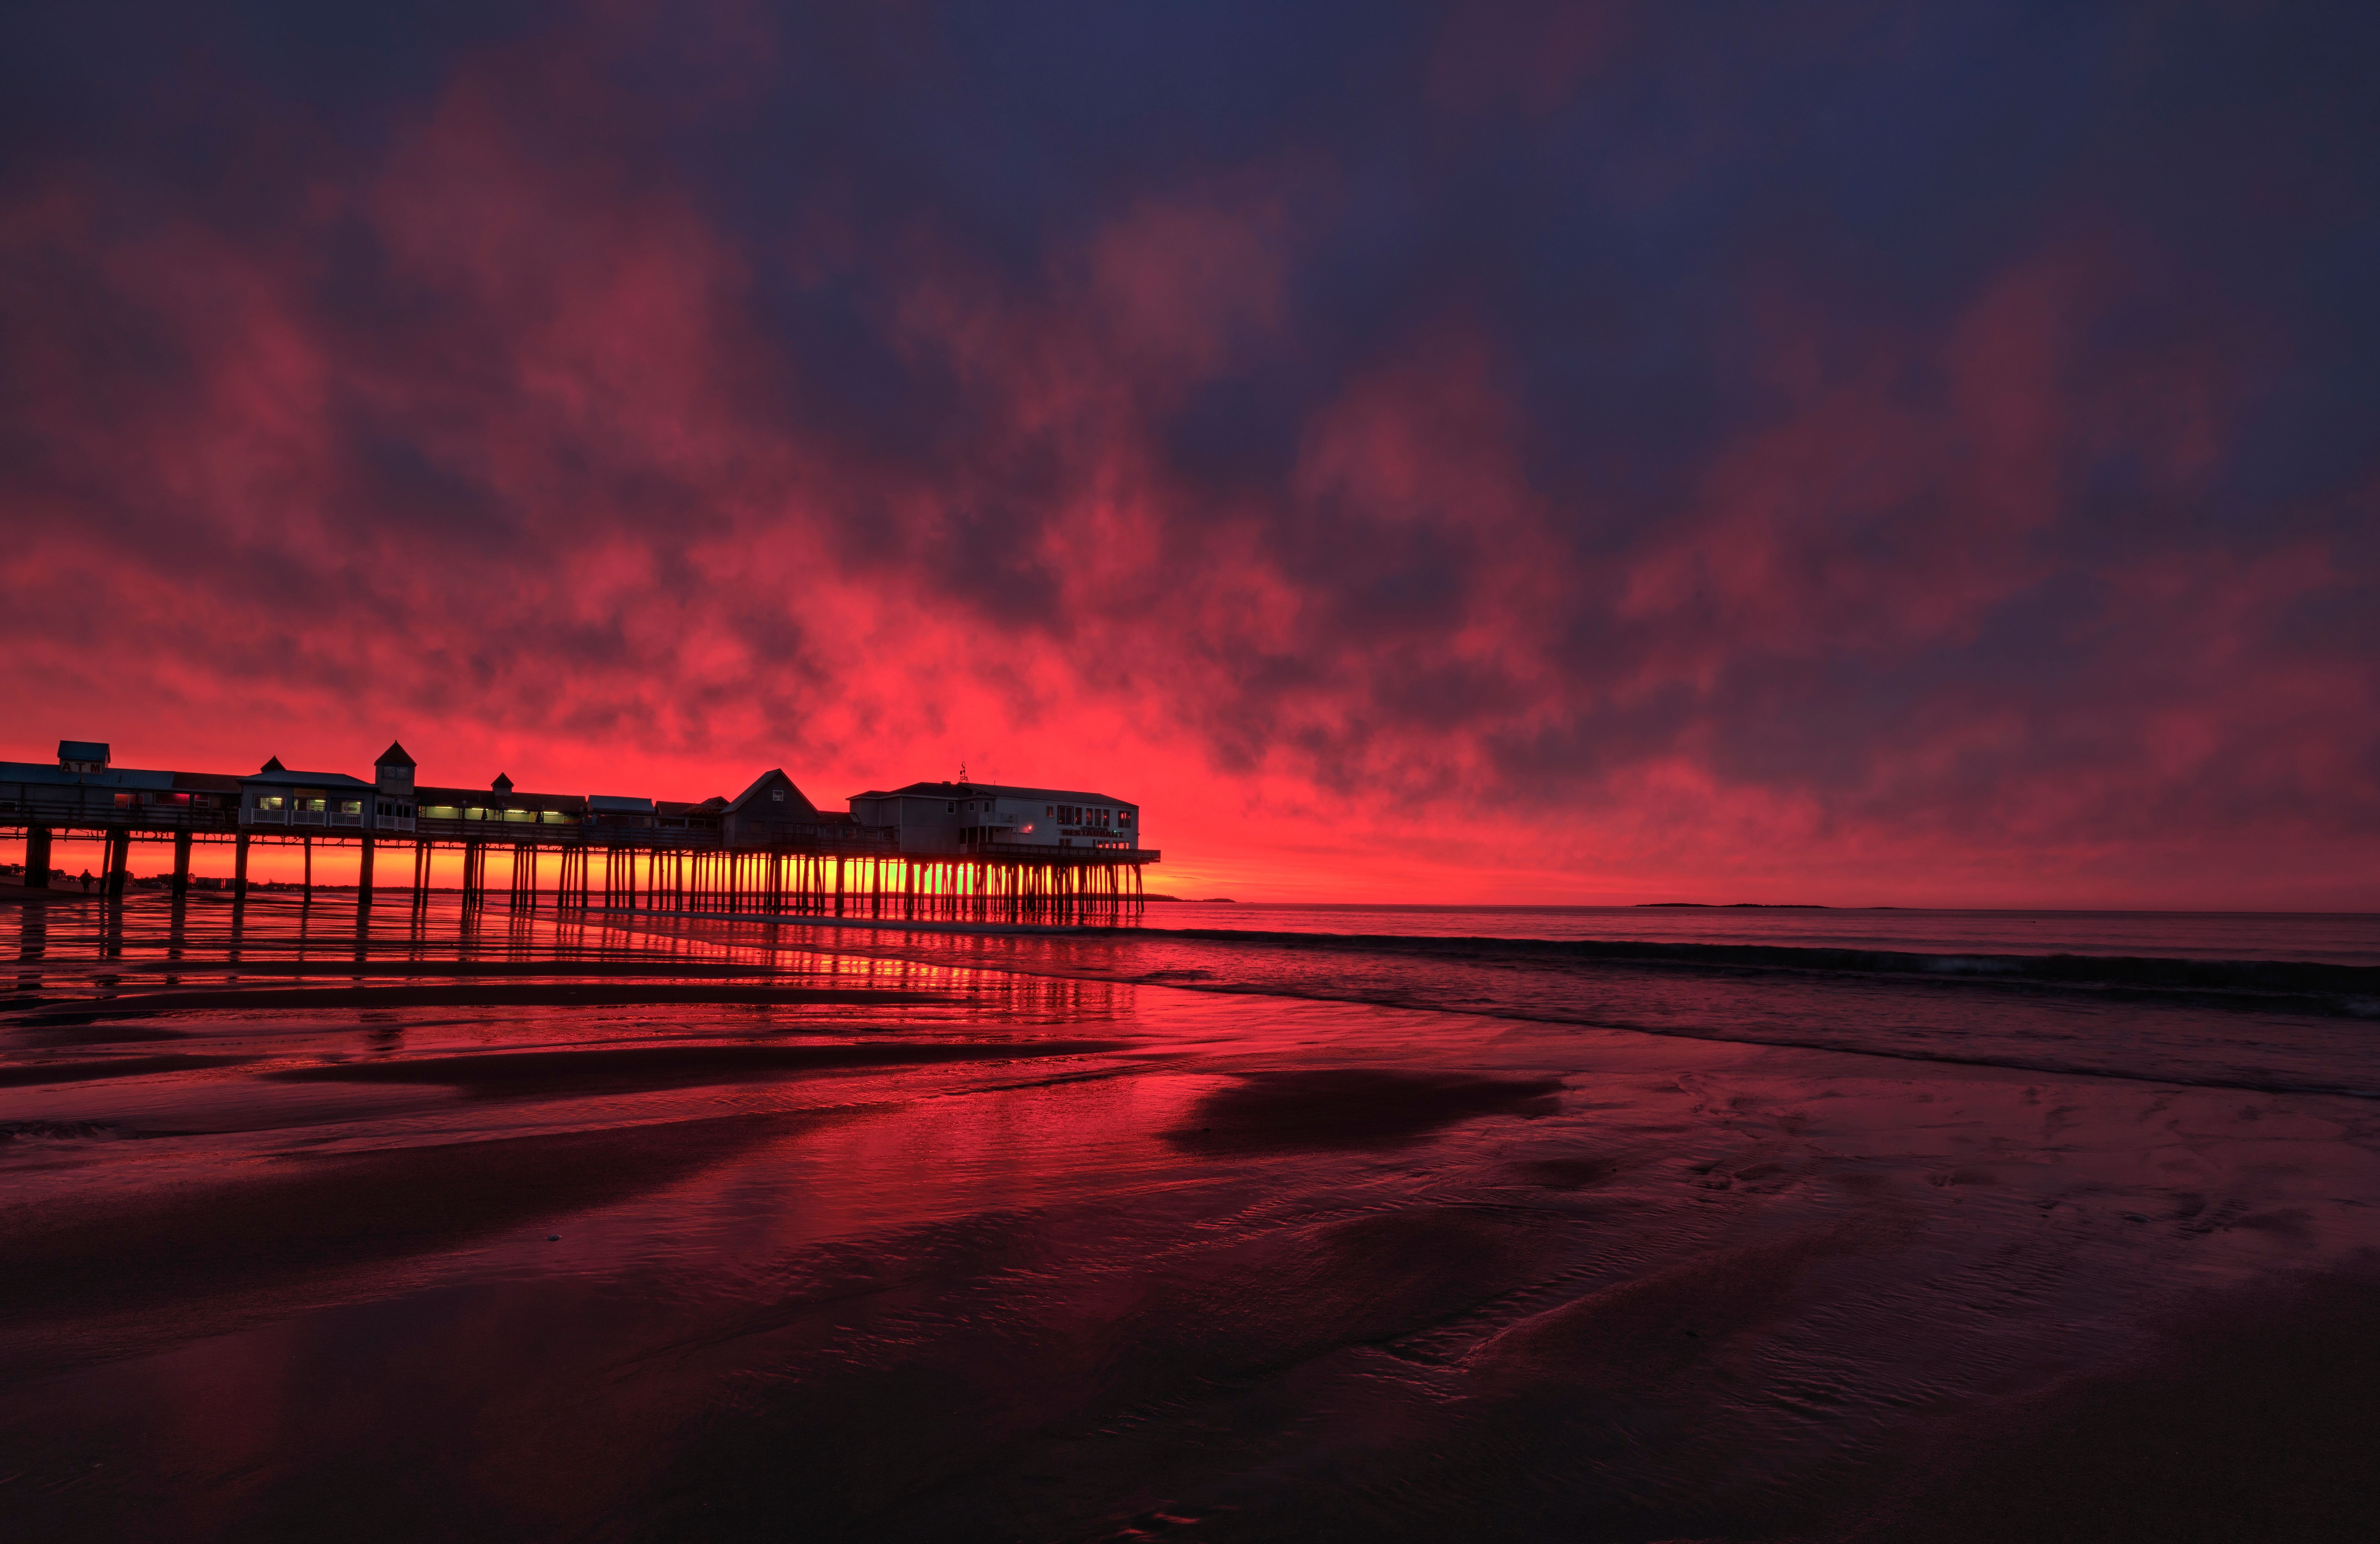 A dramatic sunrise at Old Orchard Beach in Maine